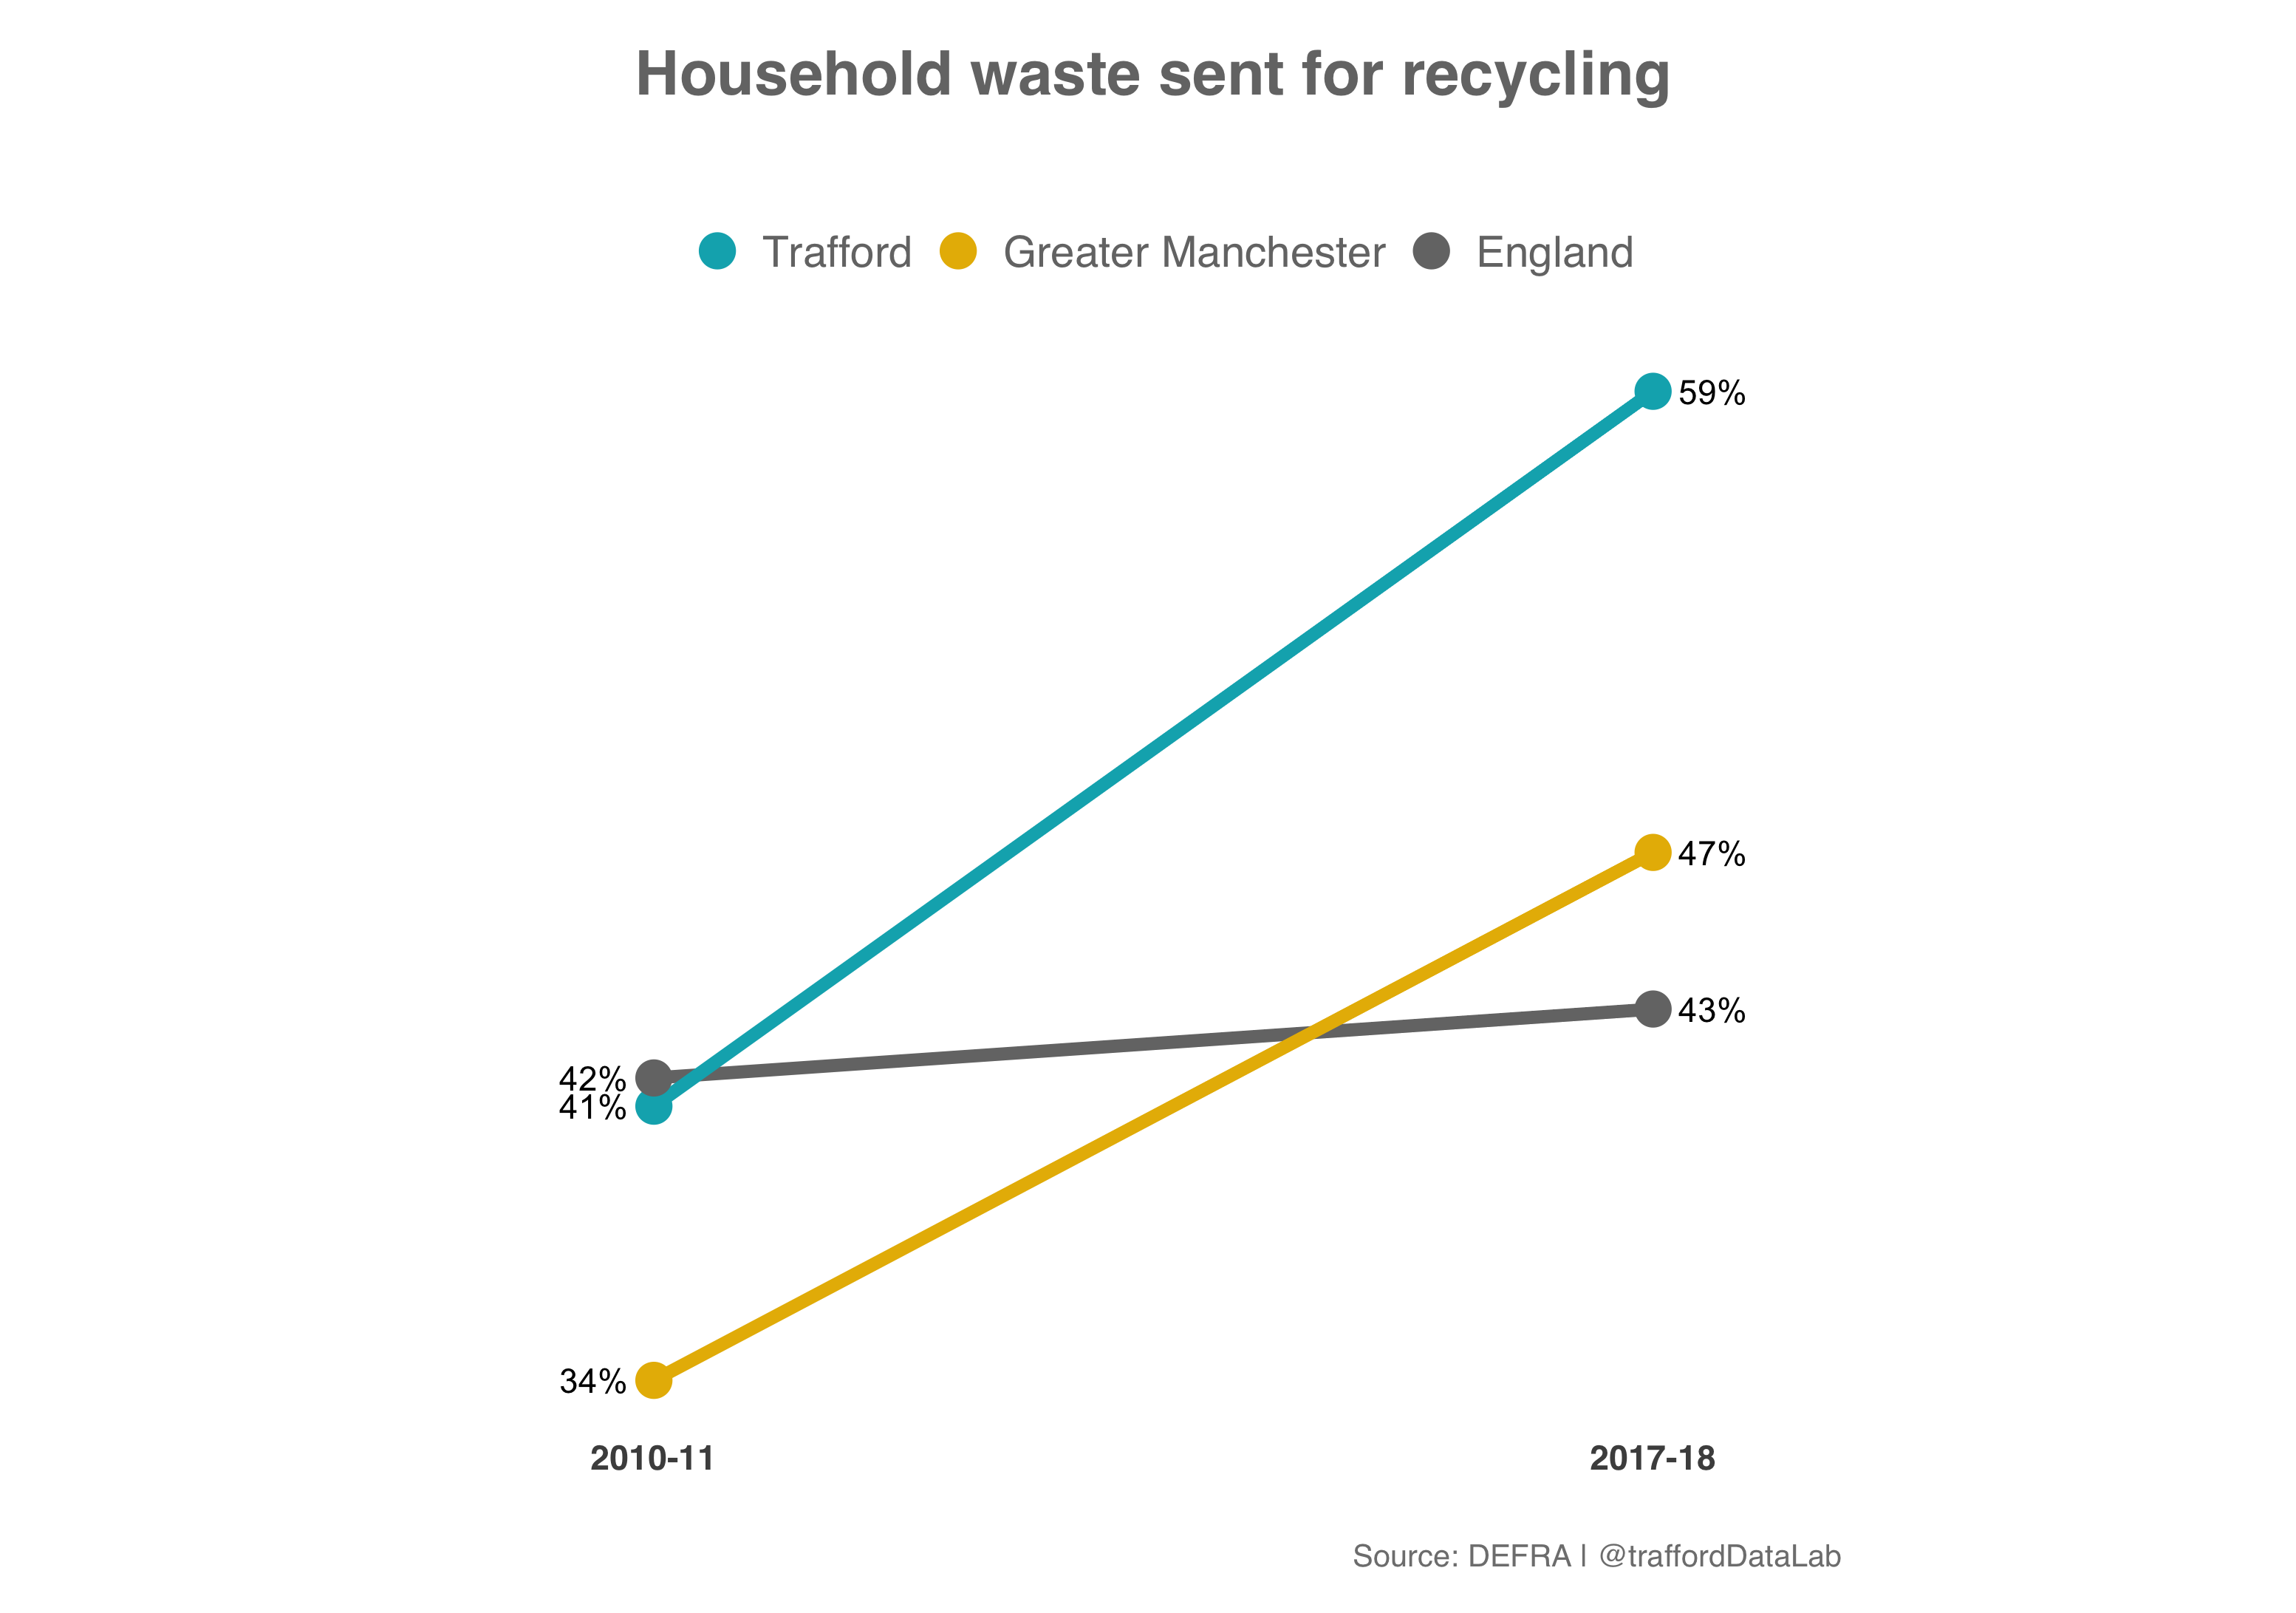 Recycling rates for Trafford, Greater Manchester and England from 2010-2011 and 2017-2018.